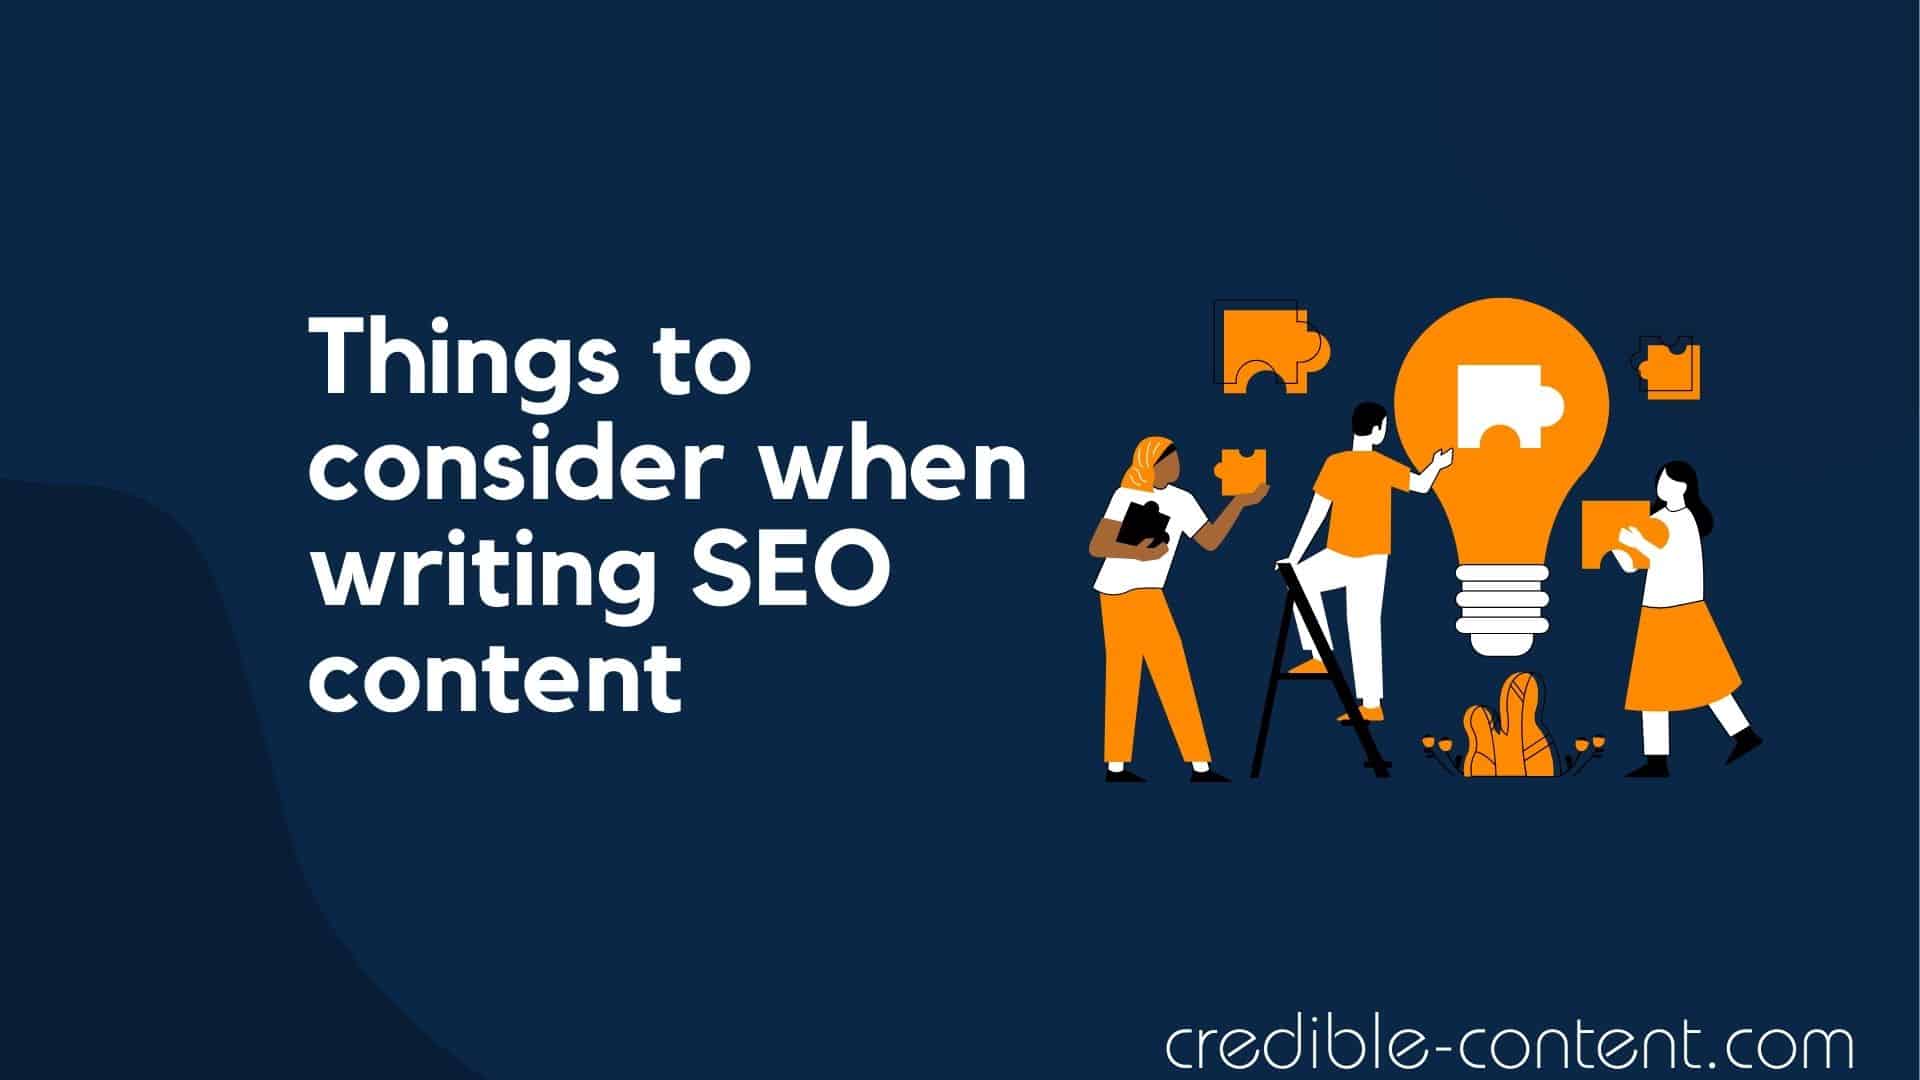 Things to consider when writing SEO content